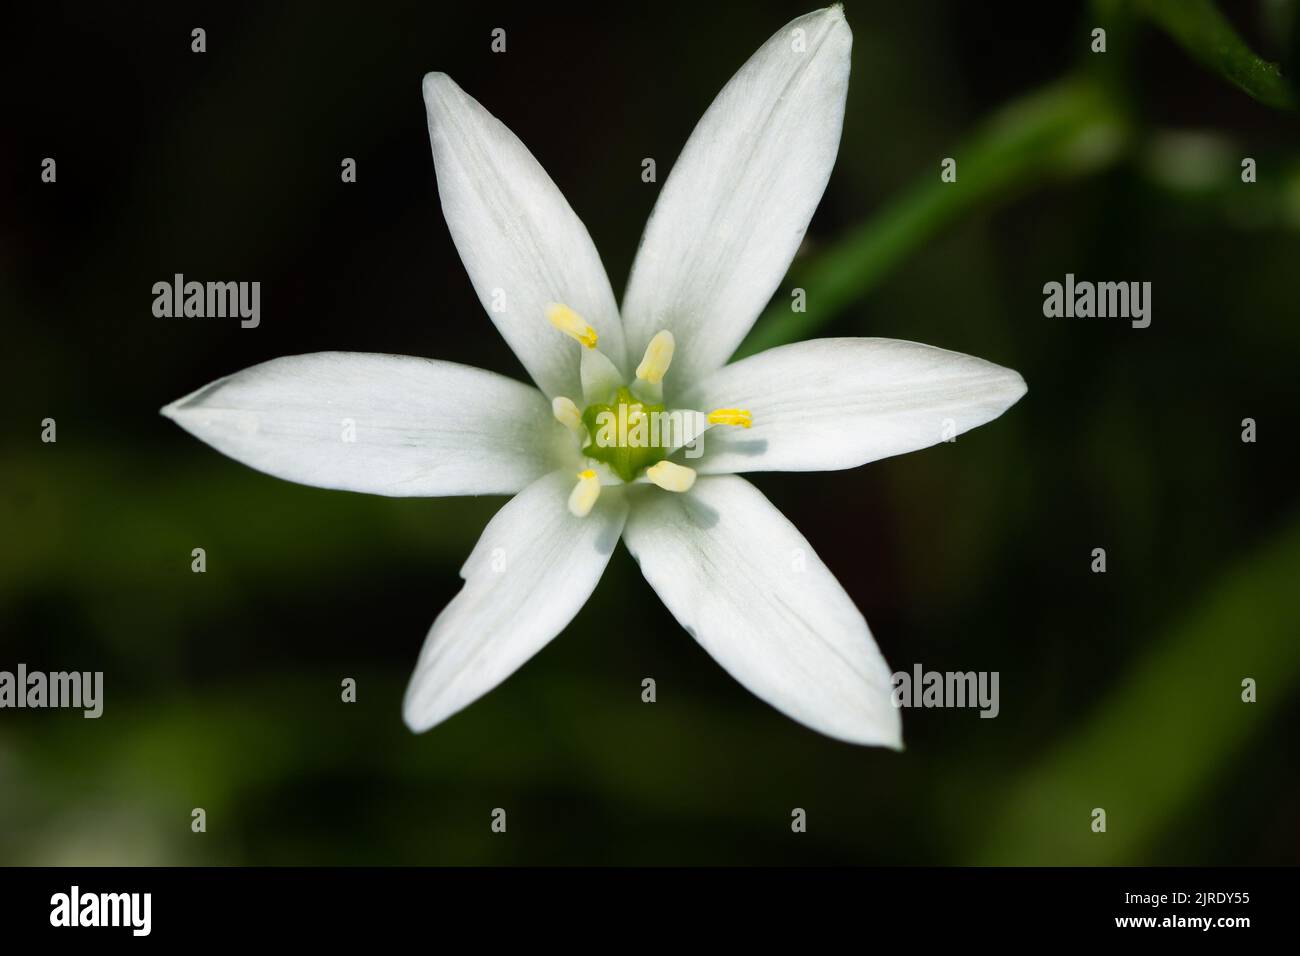 A closeup shot of a blooming white Ornithogalum flower Stock Photo